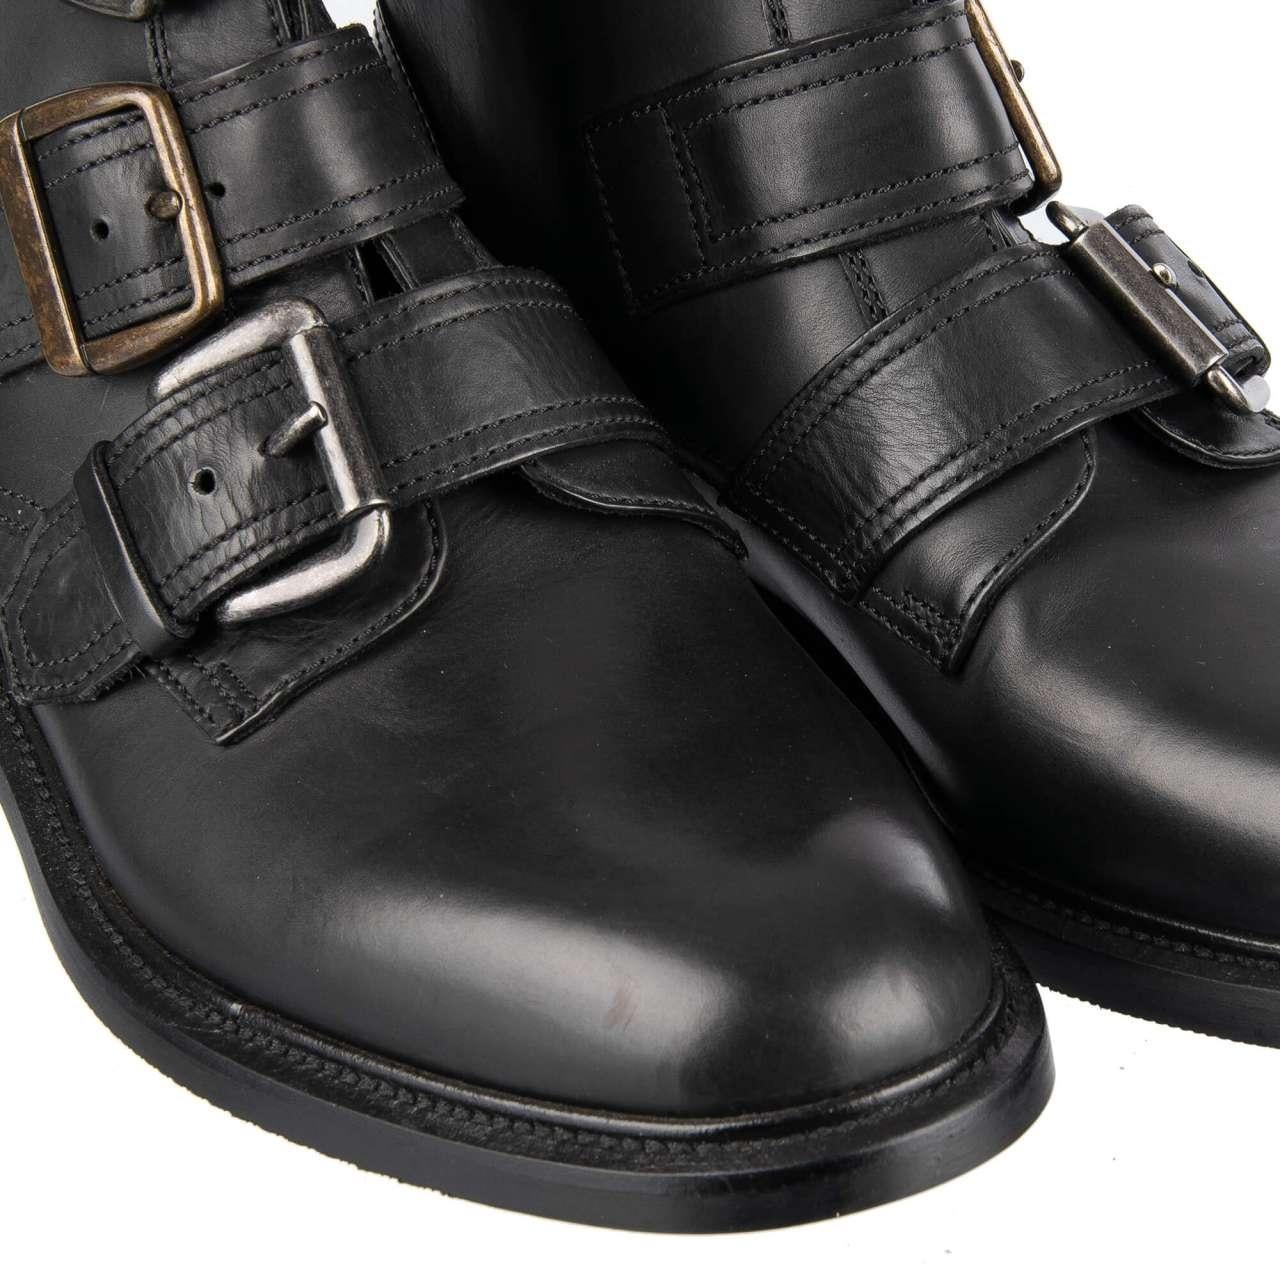 Dolce & Gabbana - Ankle Boots with Buckles MARSALA Black EUR 42 For Sale 2